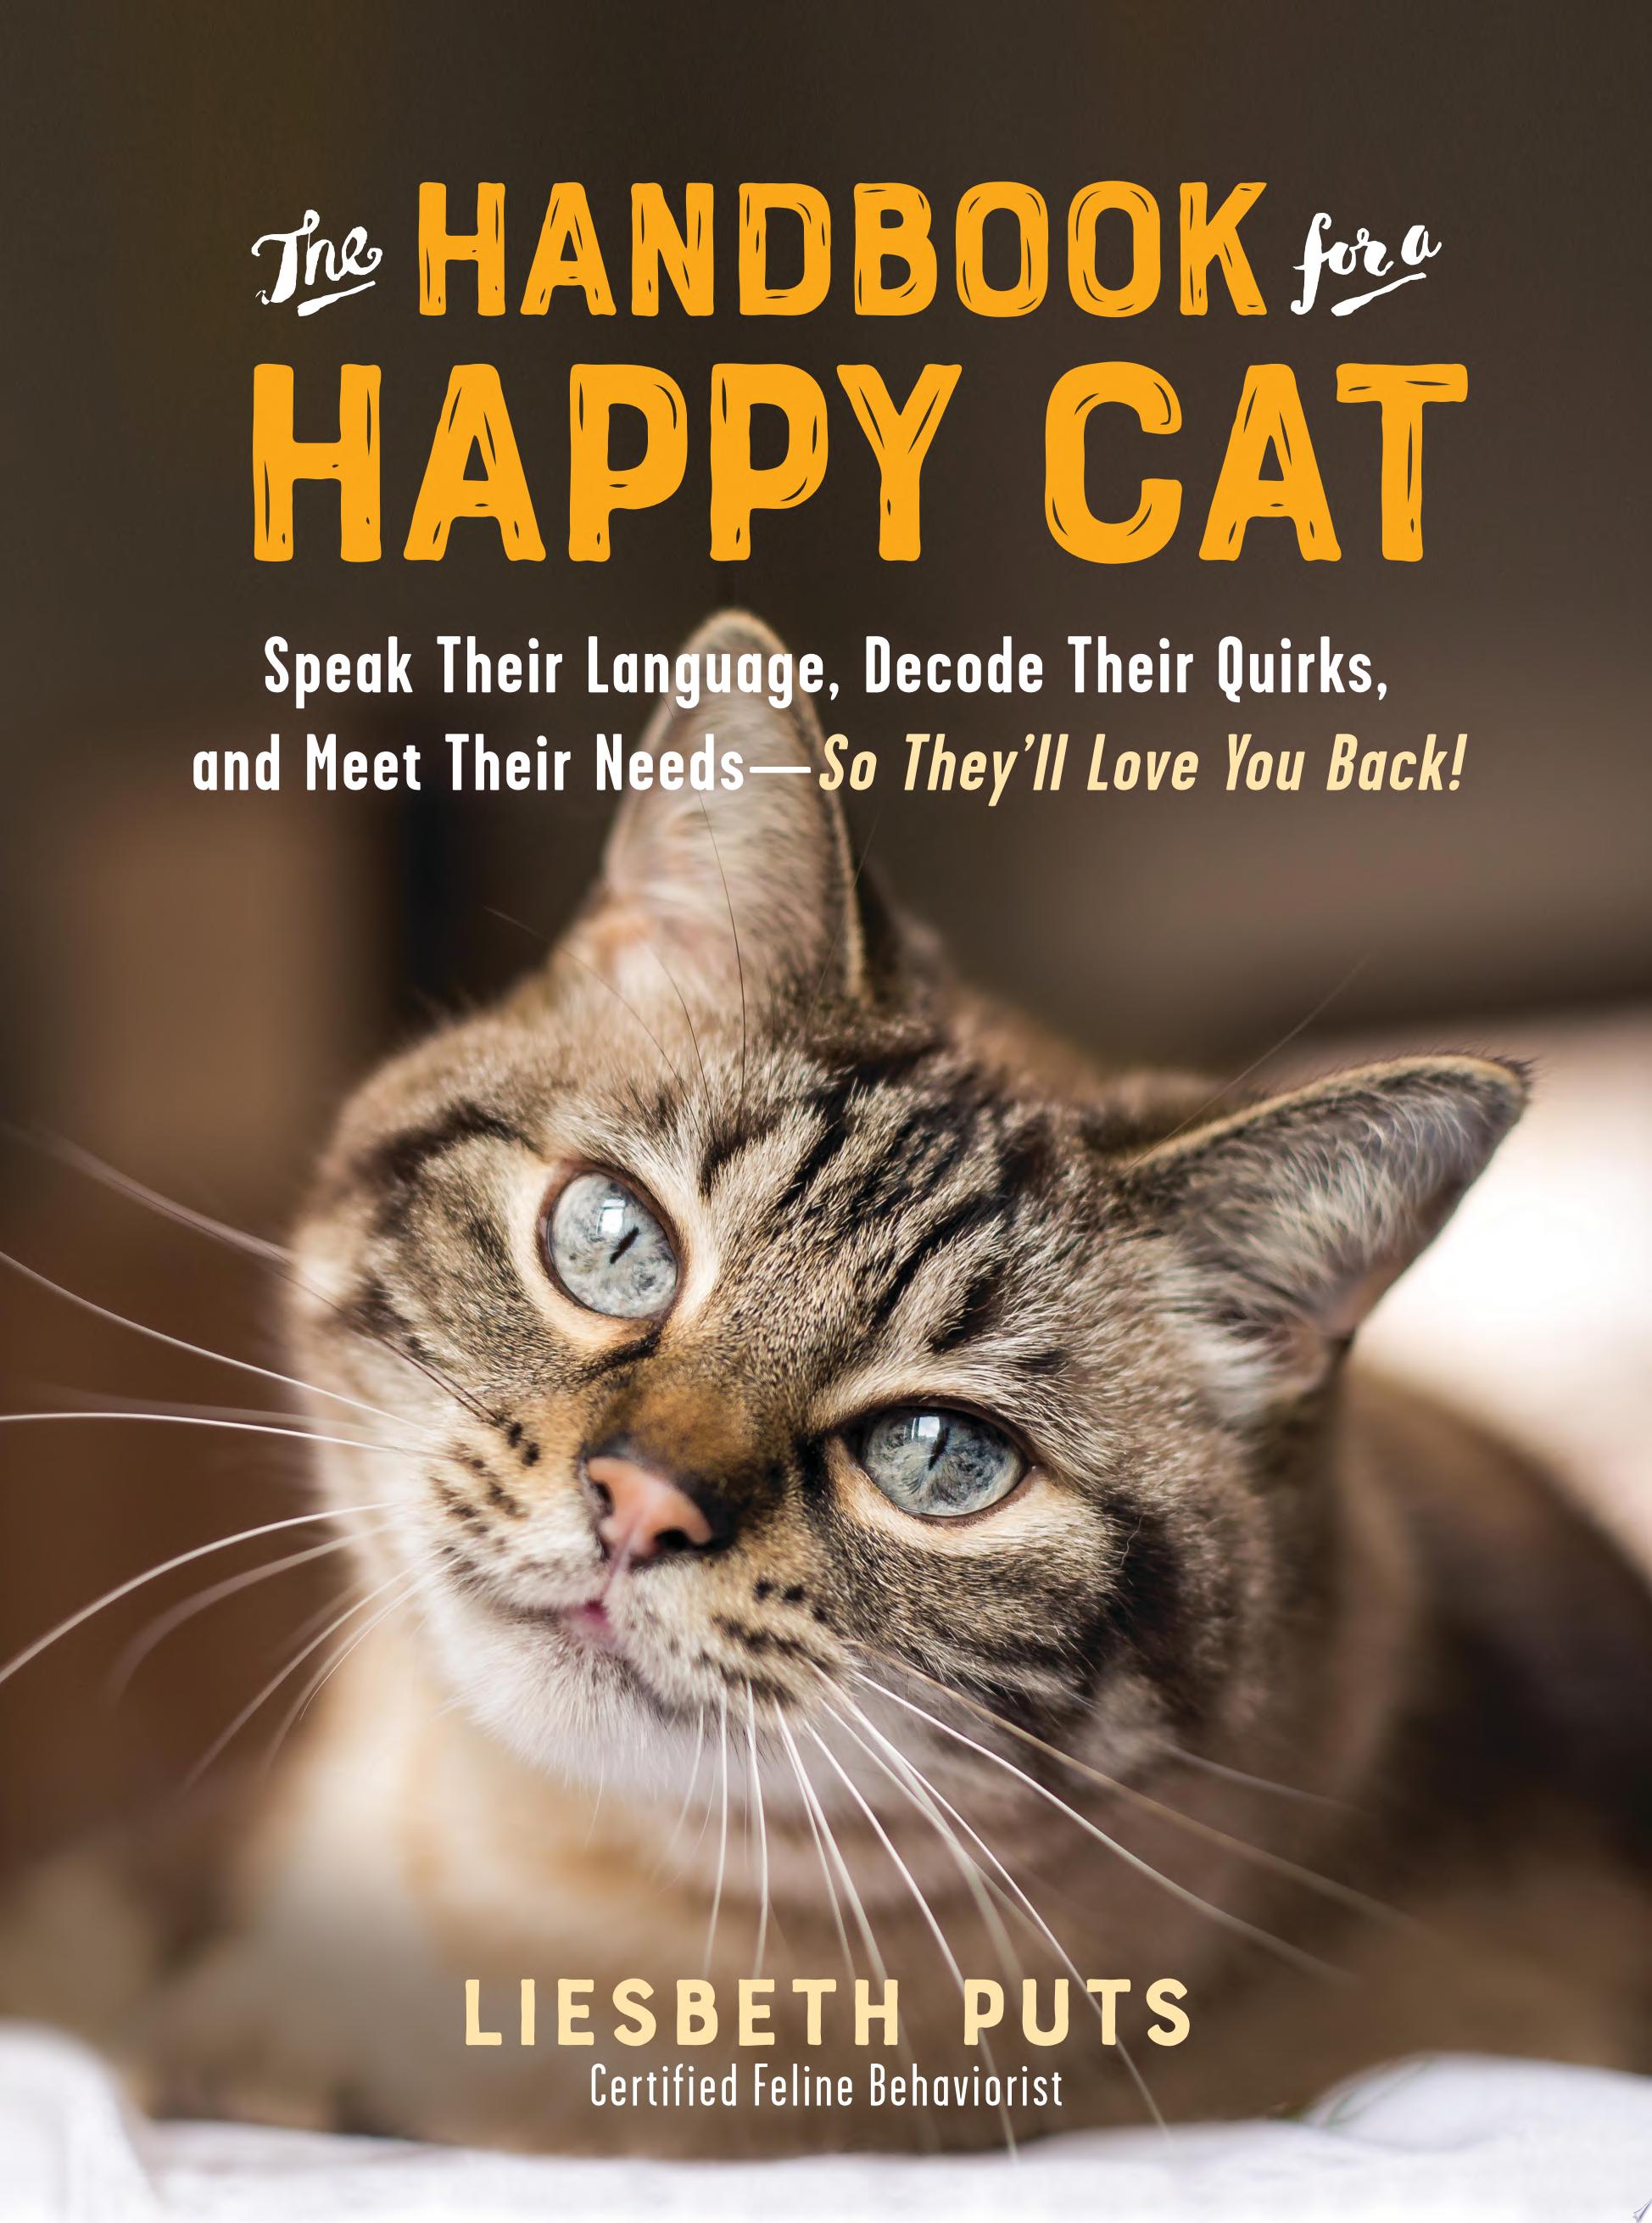 Image for "The Handbook for a Happy Cat"